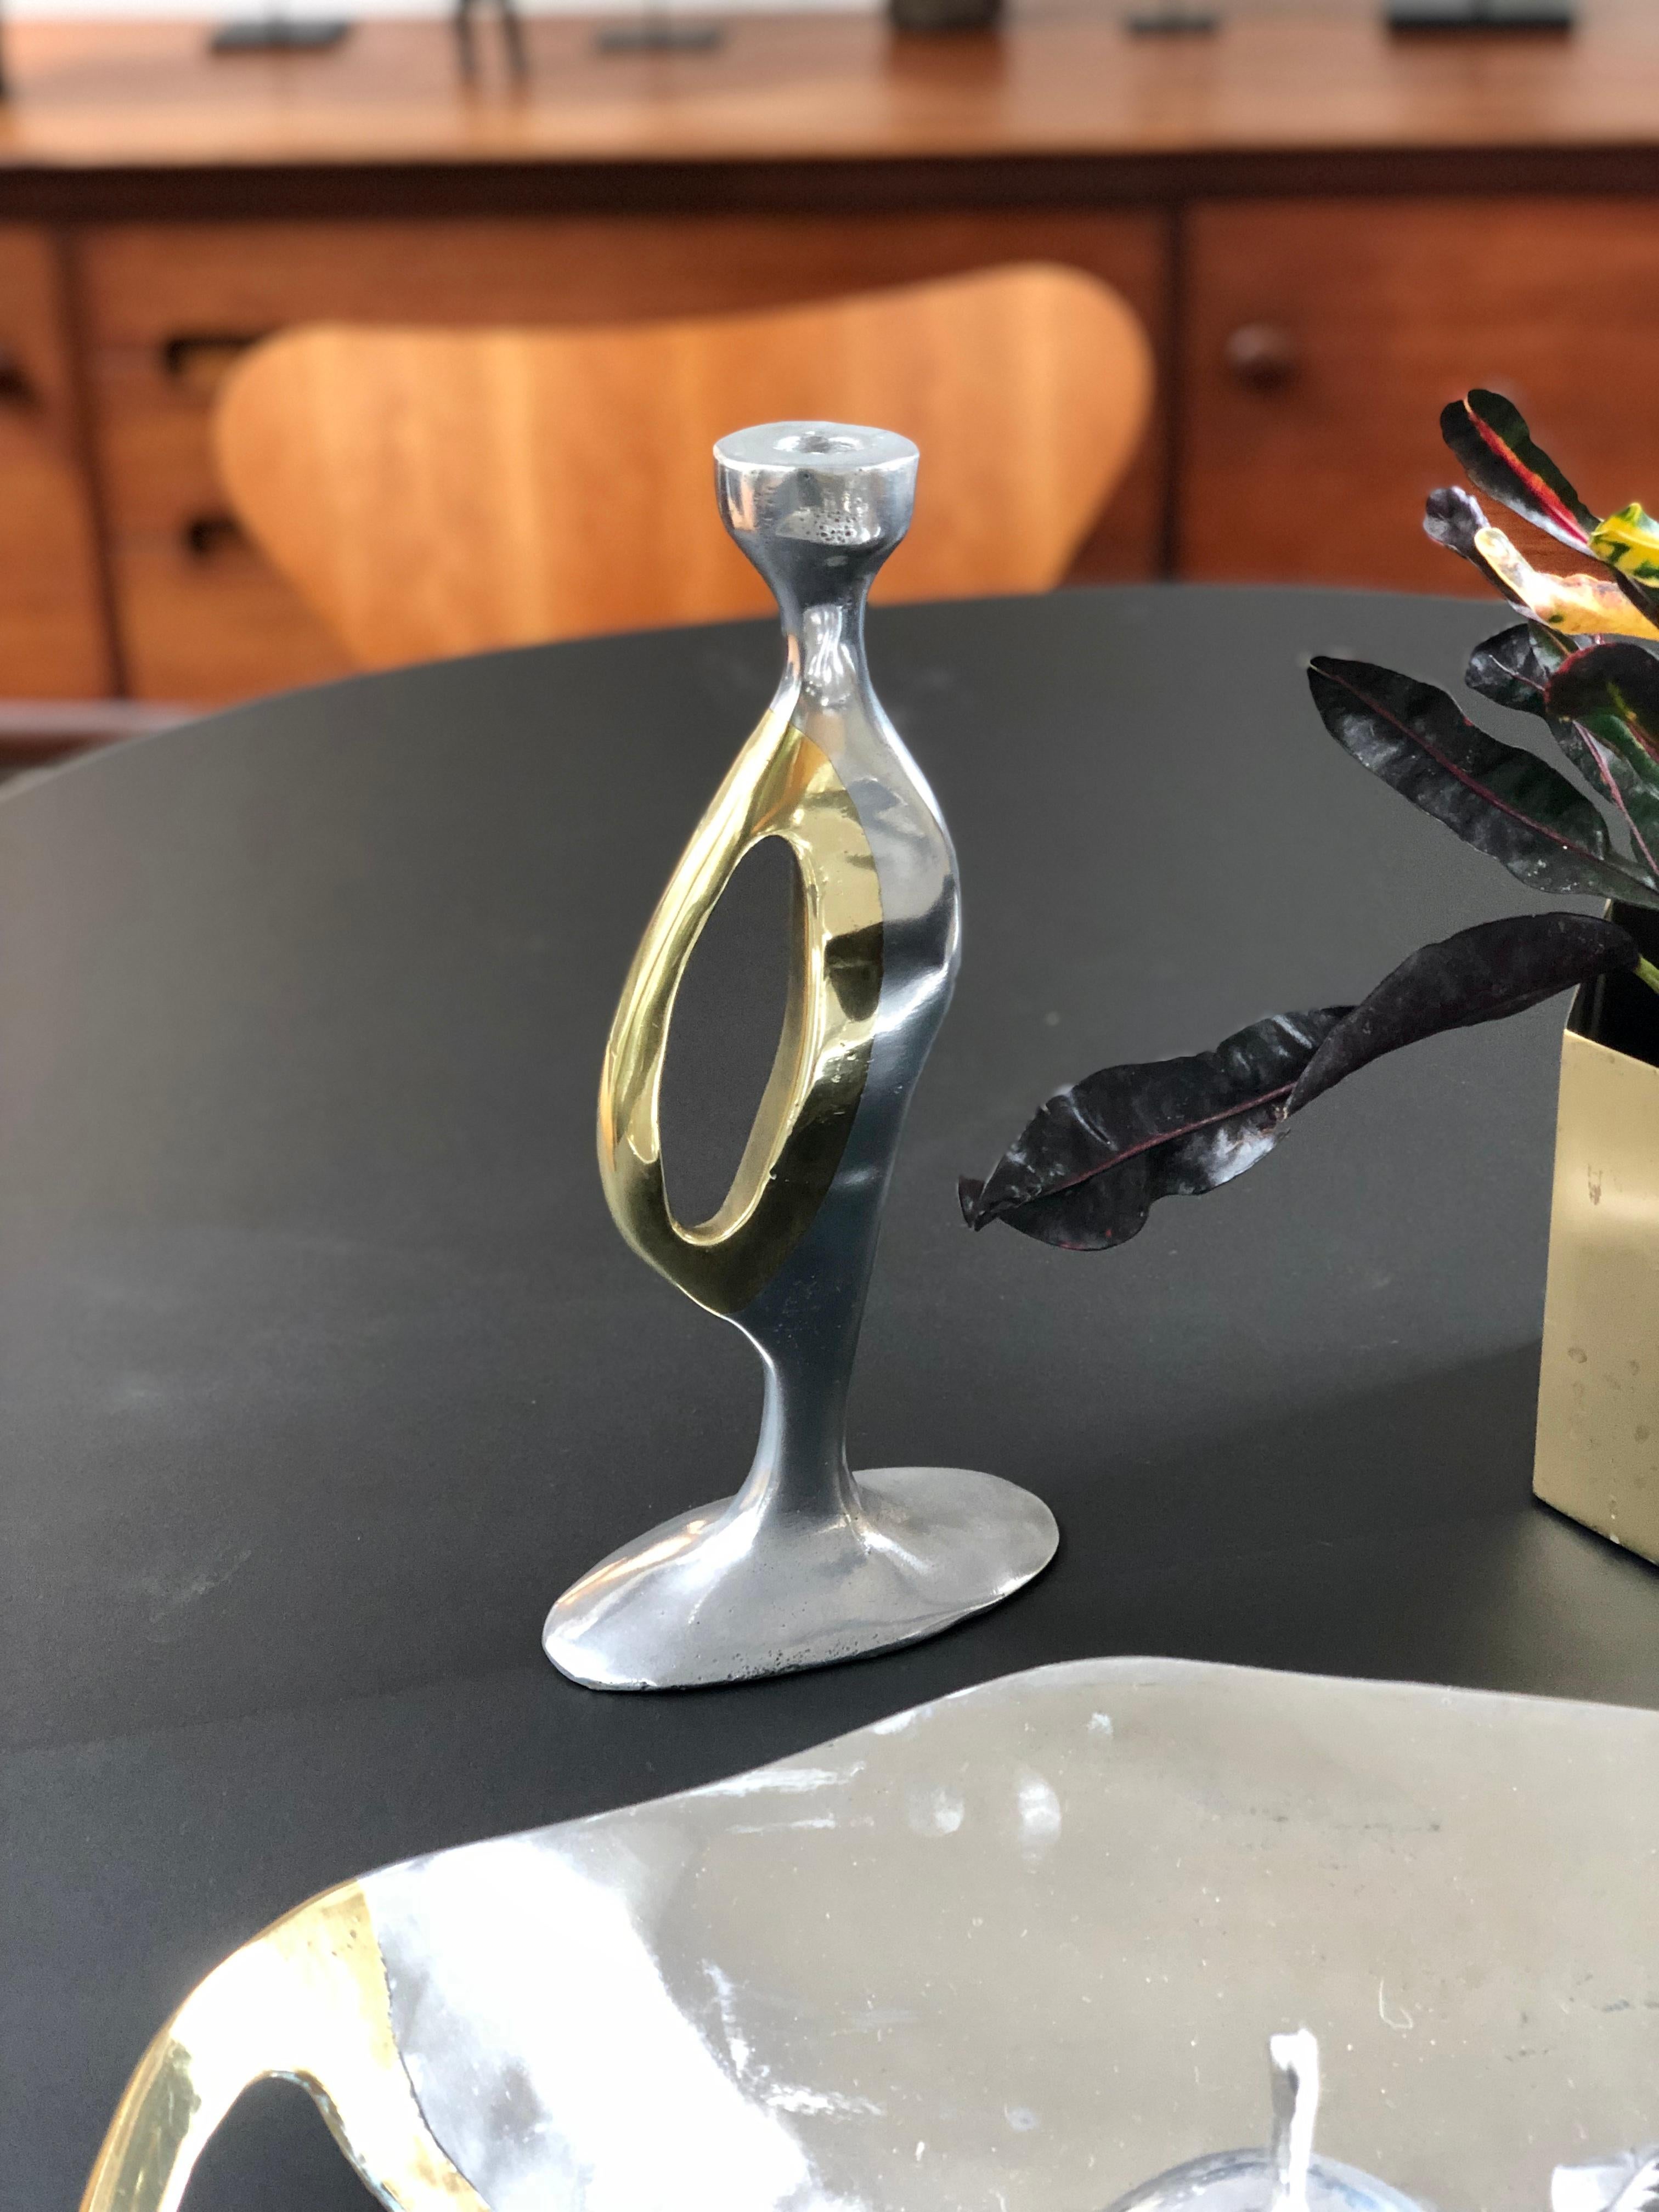 Aluminium and brass Brutalist style candleholder by Leopold, s.c., (circa 1970s). In the style of David Marshall, this candleholder stands on a solid aluminium base with a brass handle. The piece is curvy and irregular and therein lies its beauty.